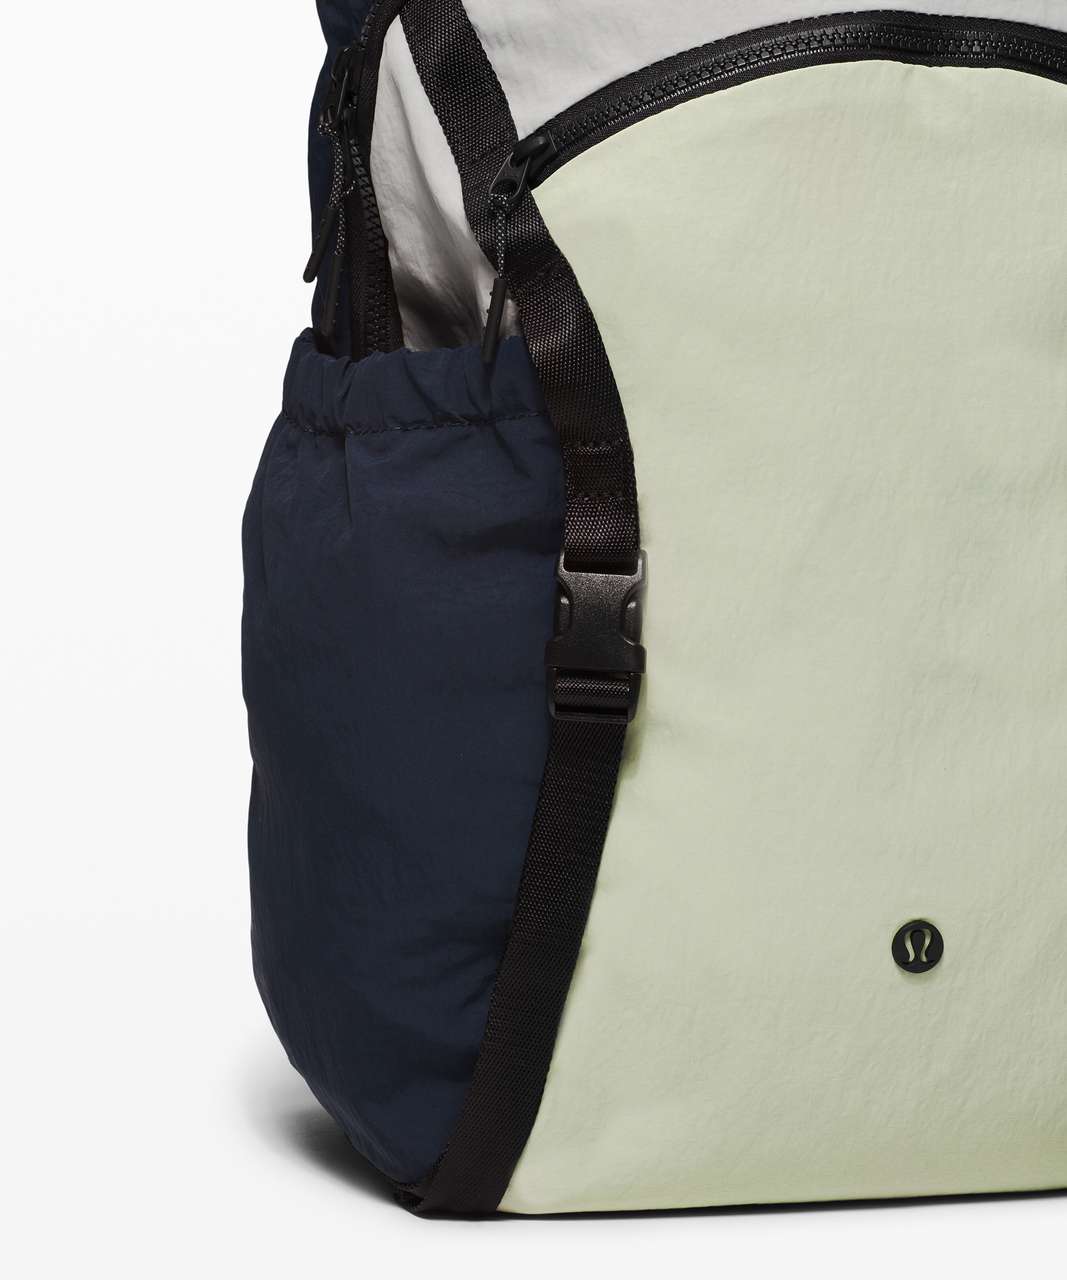 Lululemon Pack and Go Backpack - Green Fern / True Navy / Silver Drop